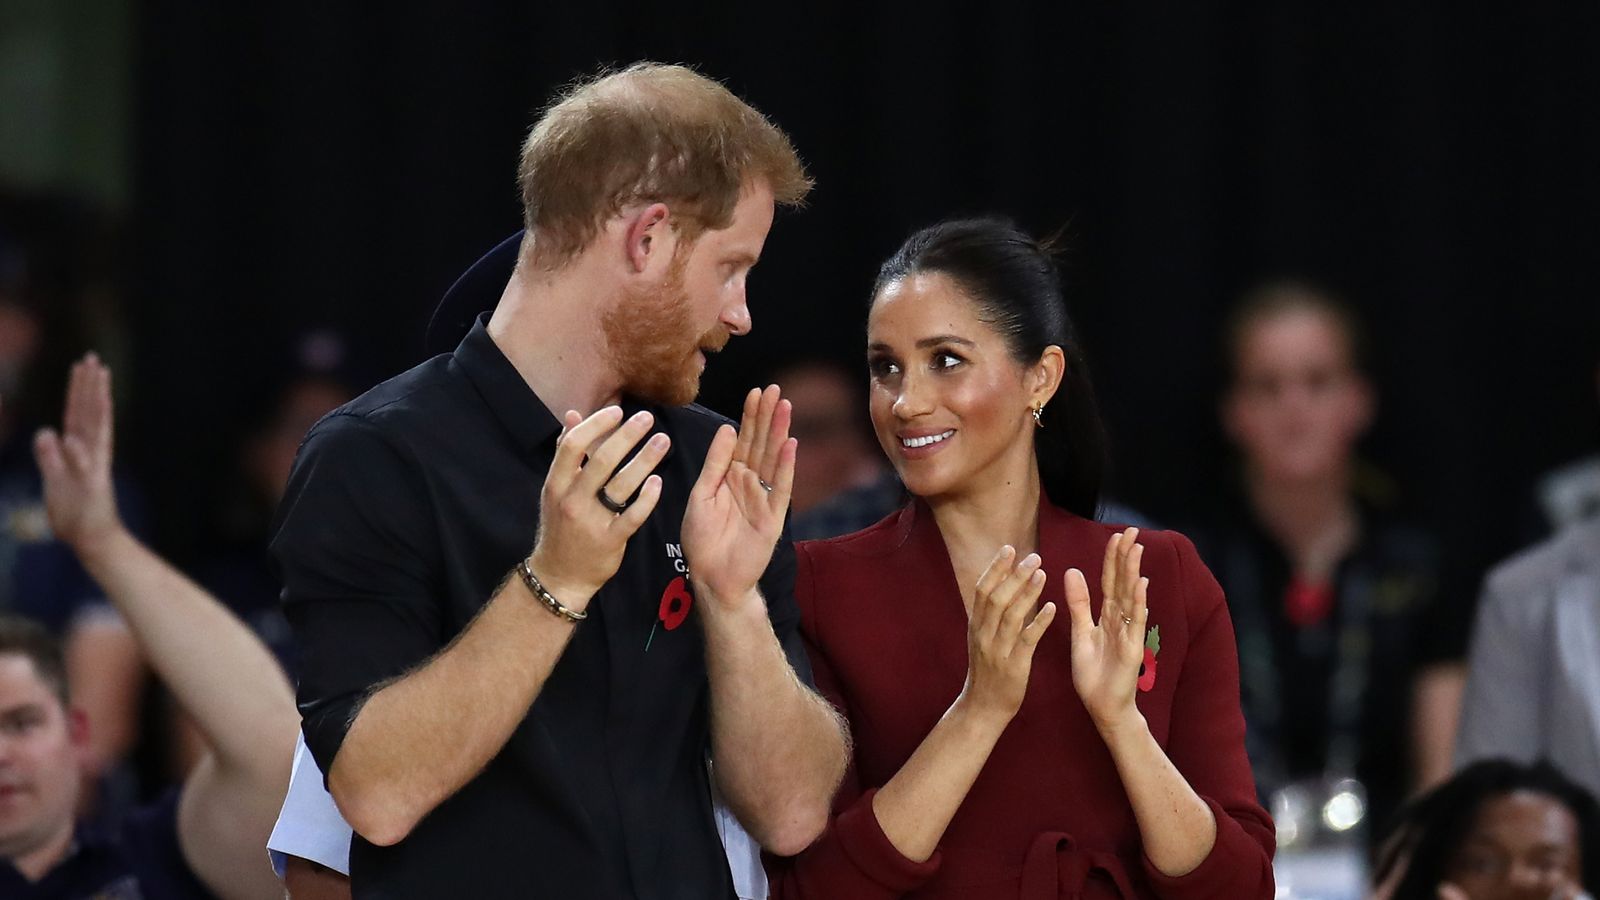 Harry and Meghan shun VIPs to sit with crowd at Invictus Games ...